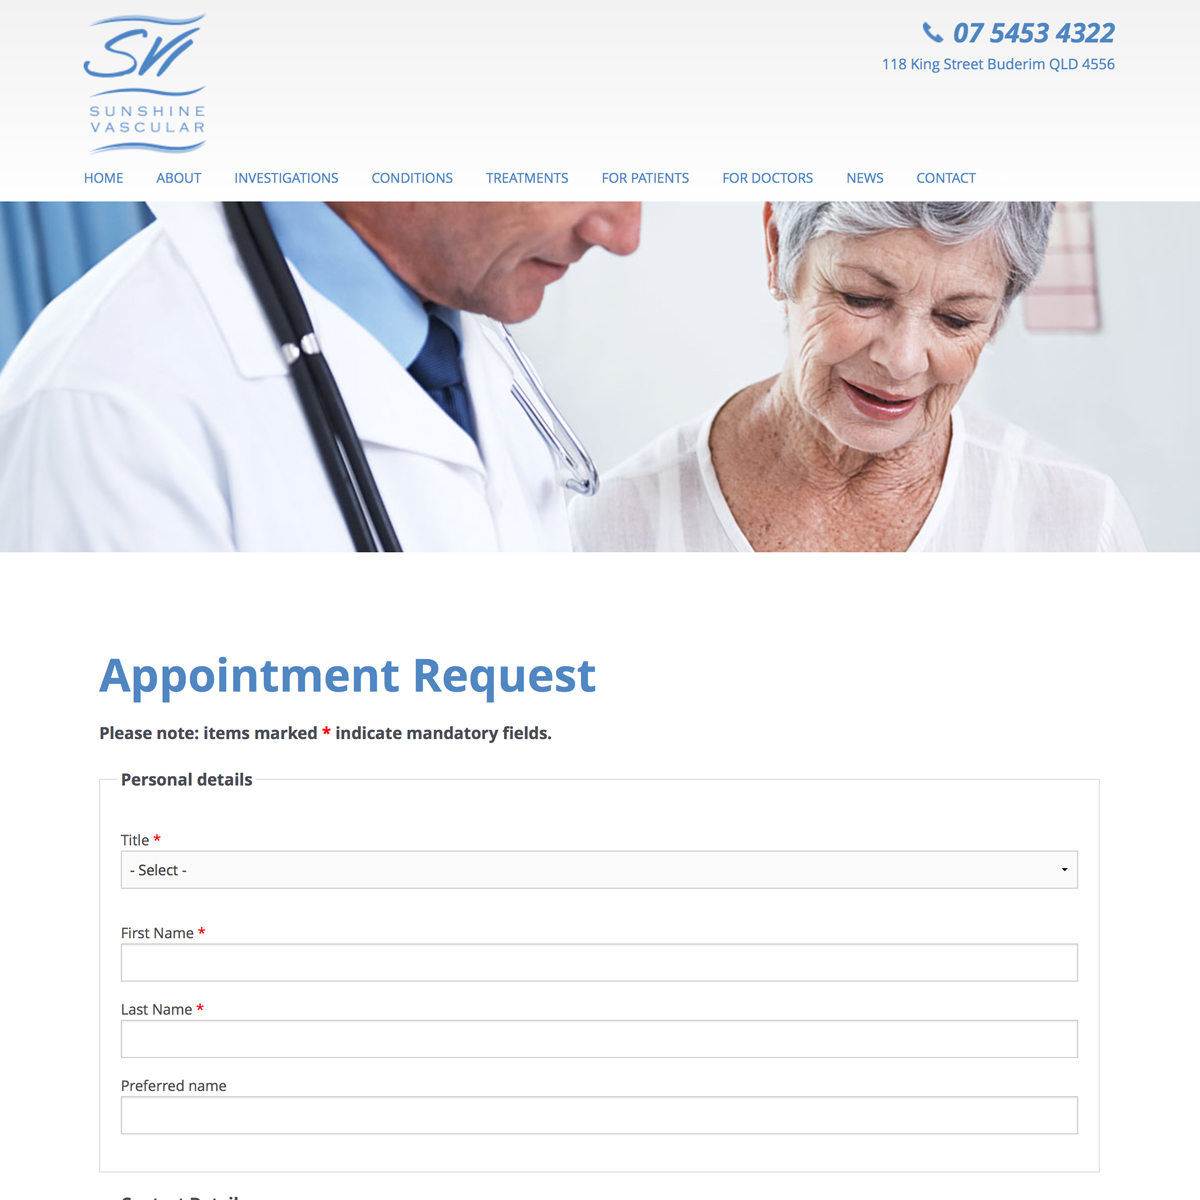 Sunshine Vascular - Appointment Request Form